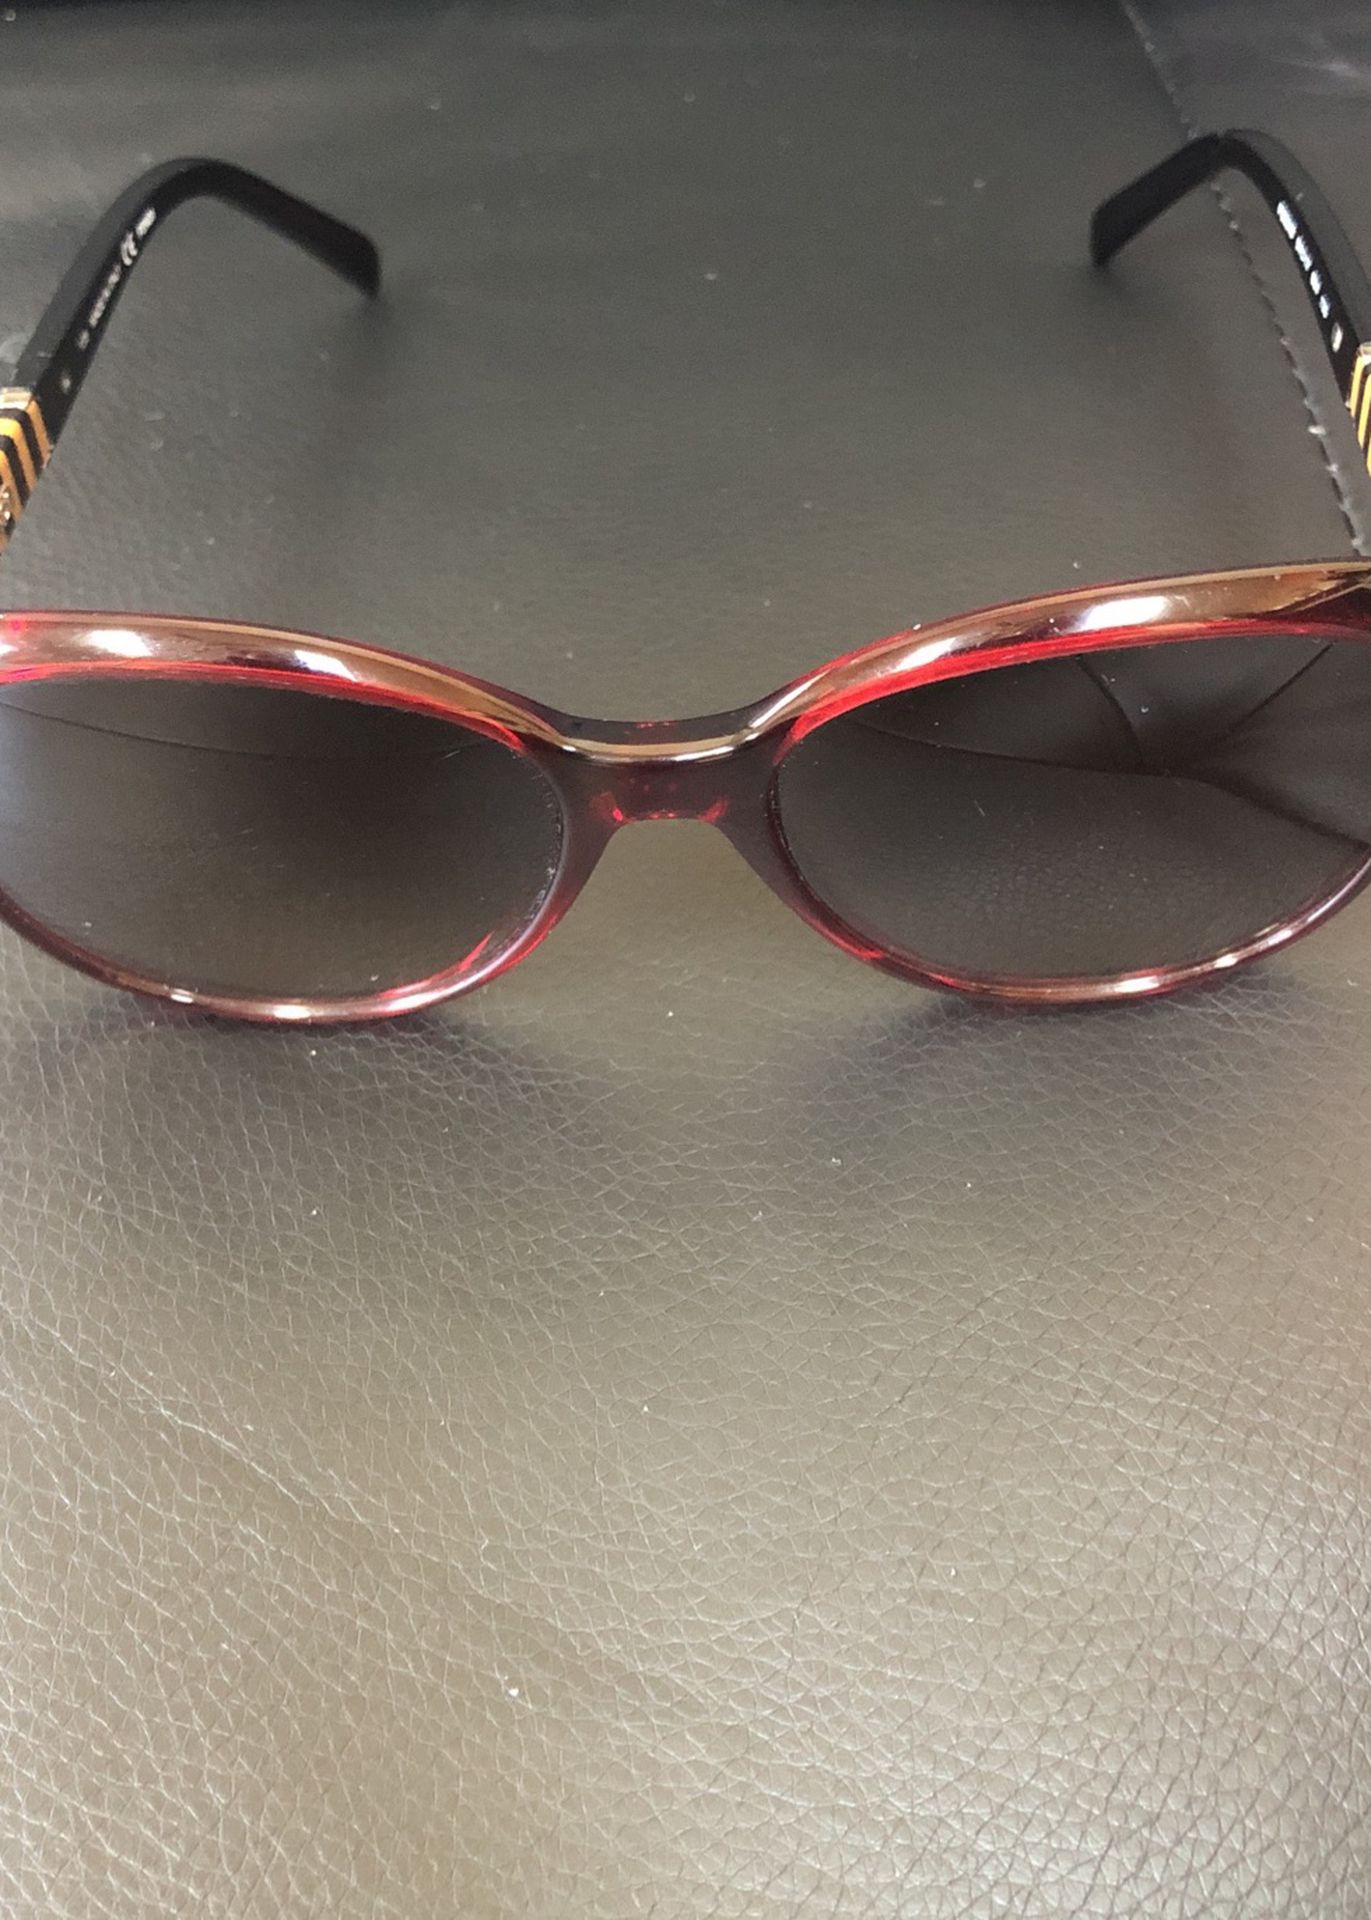 Fendi Oversized round Sunglasses in red and black